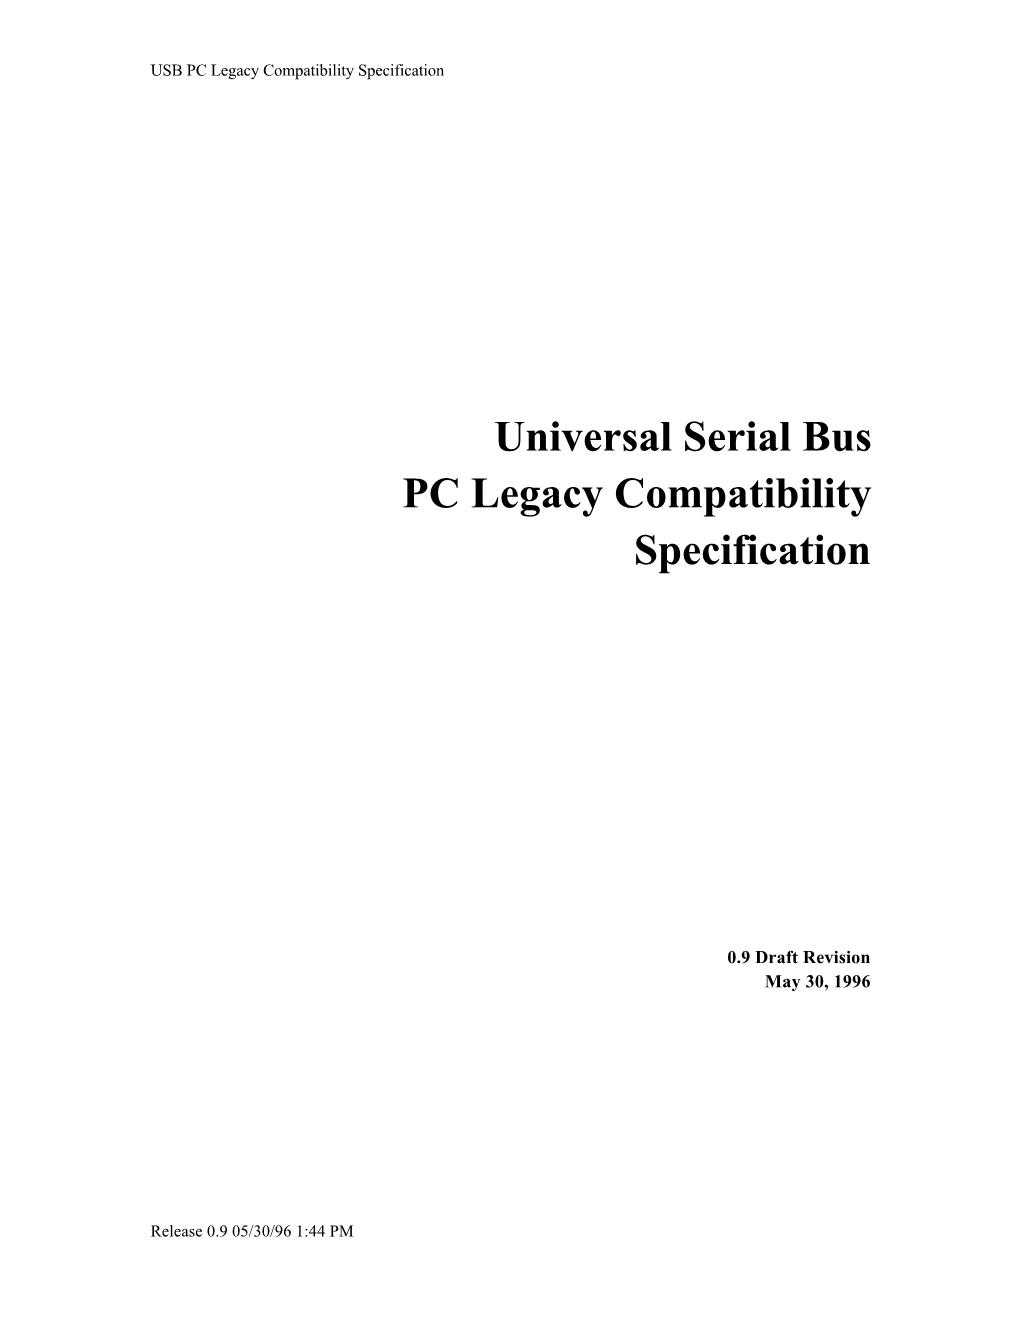 Universal Serial Bus PC Legacy Compatibility Specification